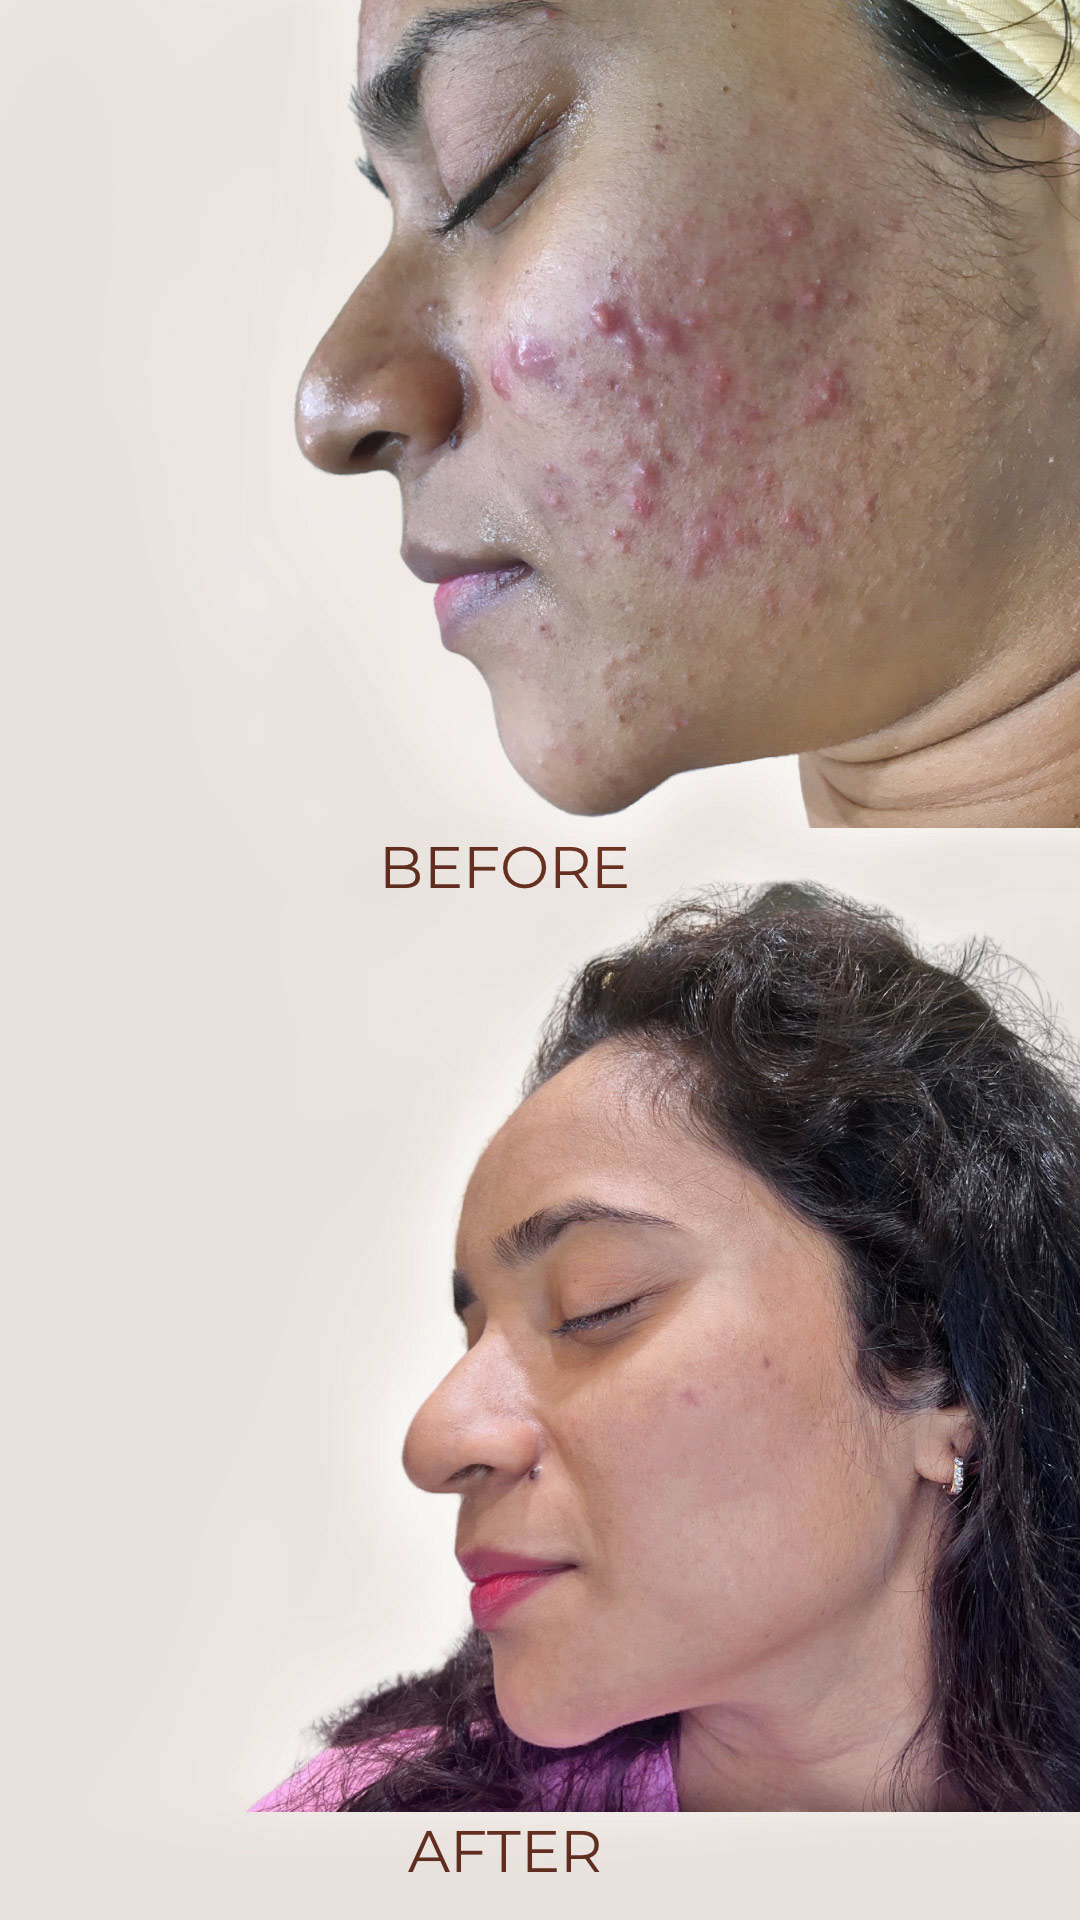 Before and after images showcasing the transformative results of The Skin Firm's Intense Acne Treatment at NIBM, revealing clear, healthy skin and reduced acne scars.